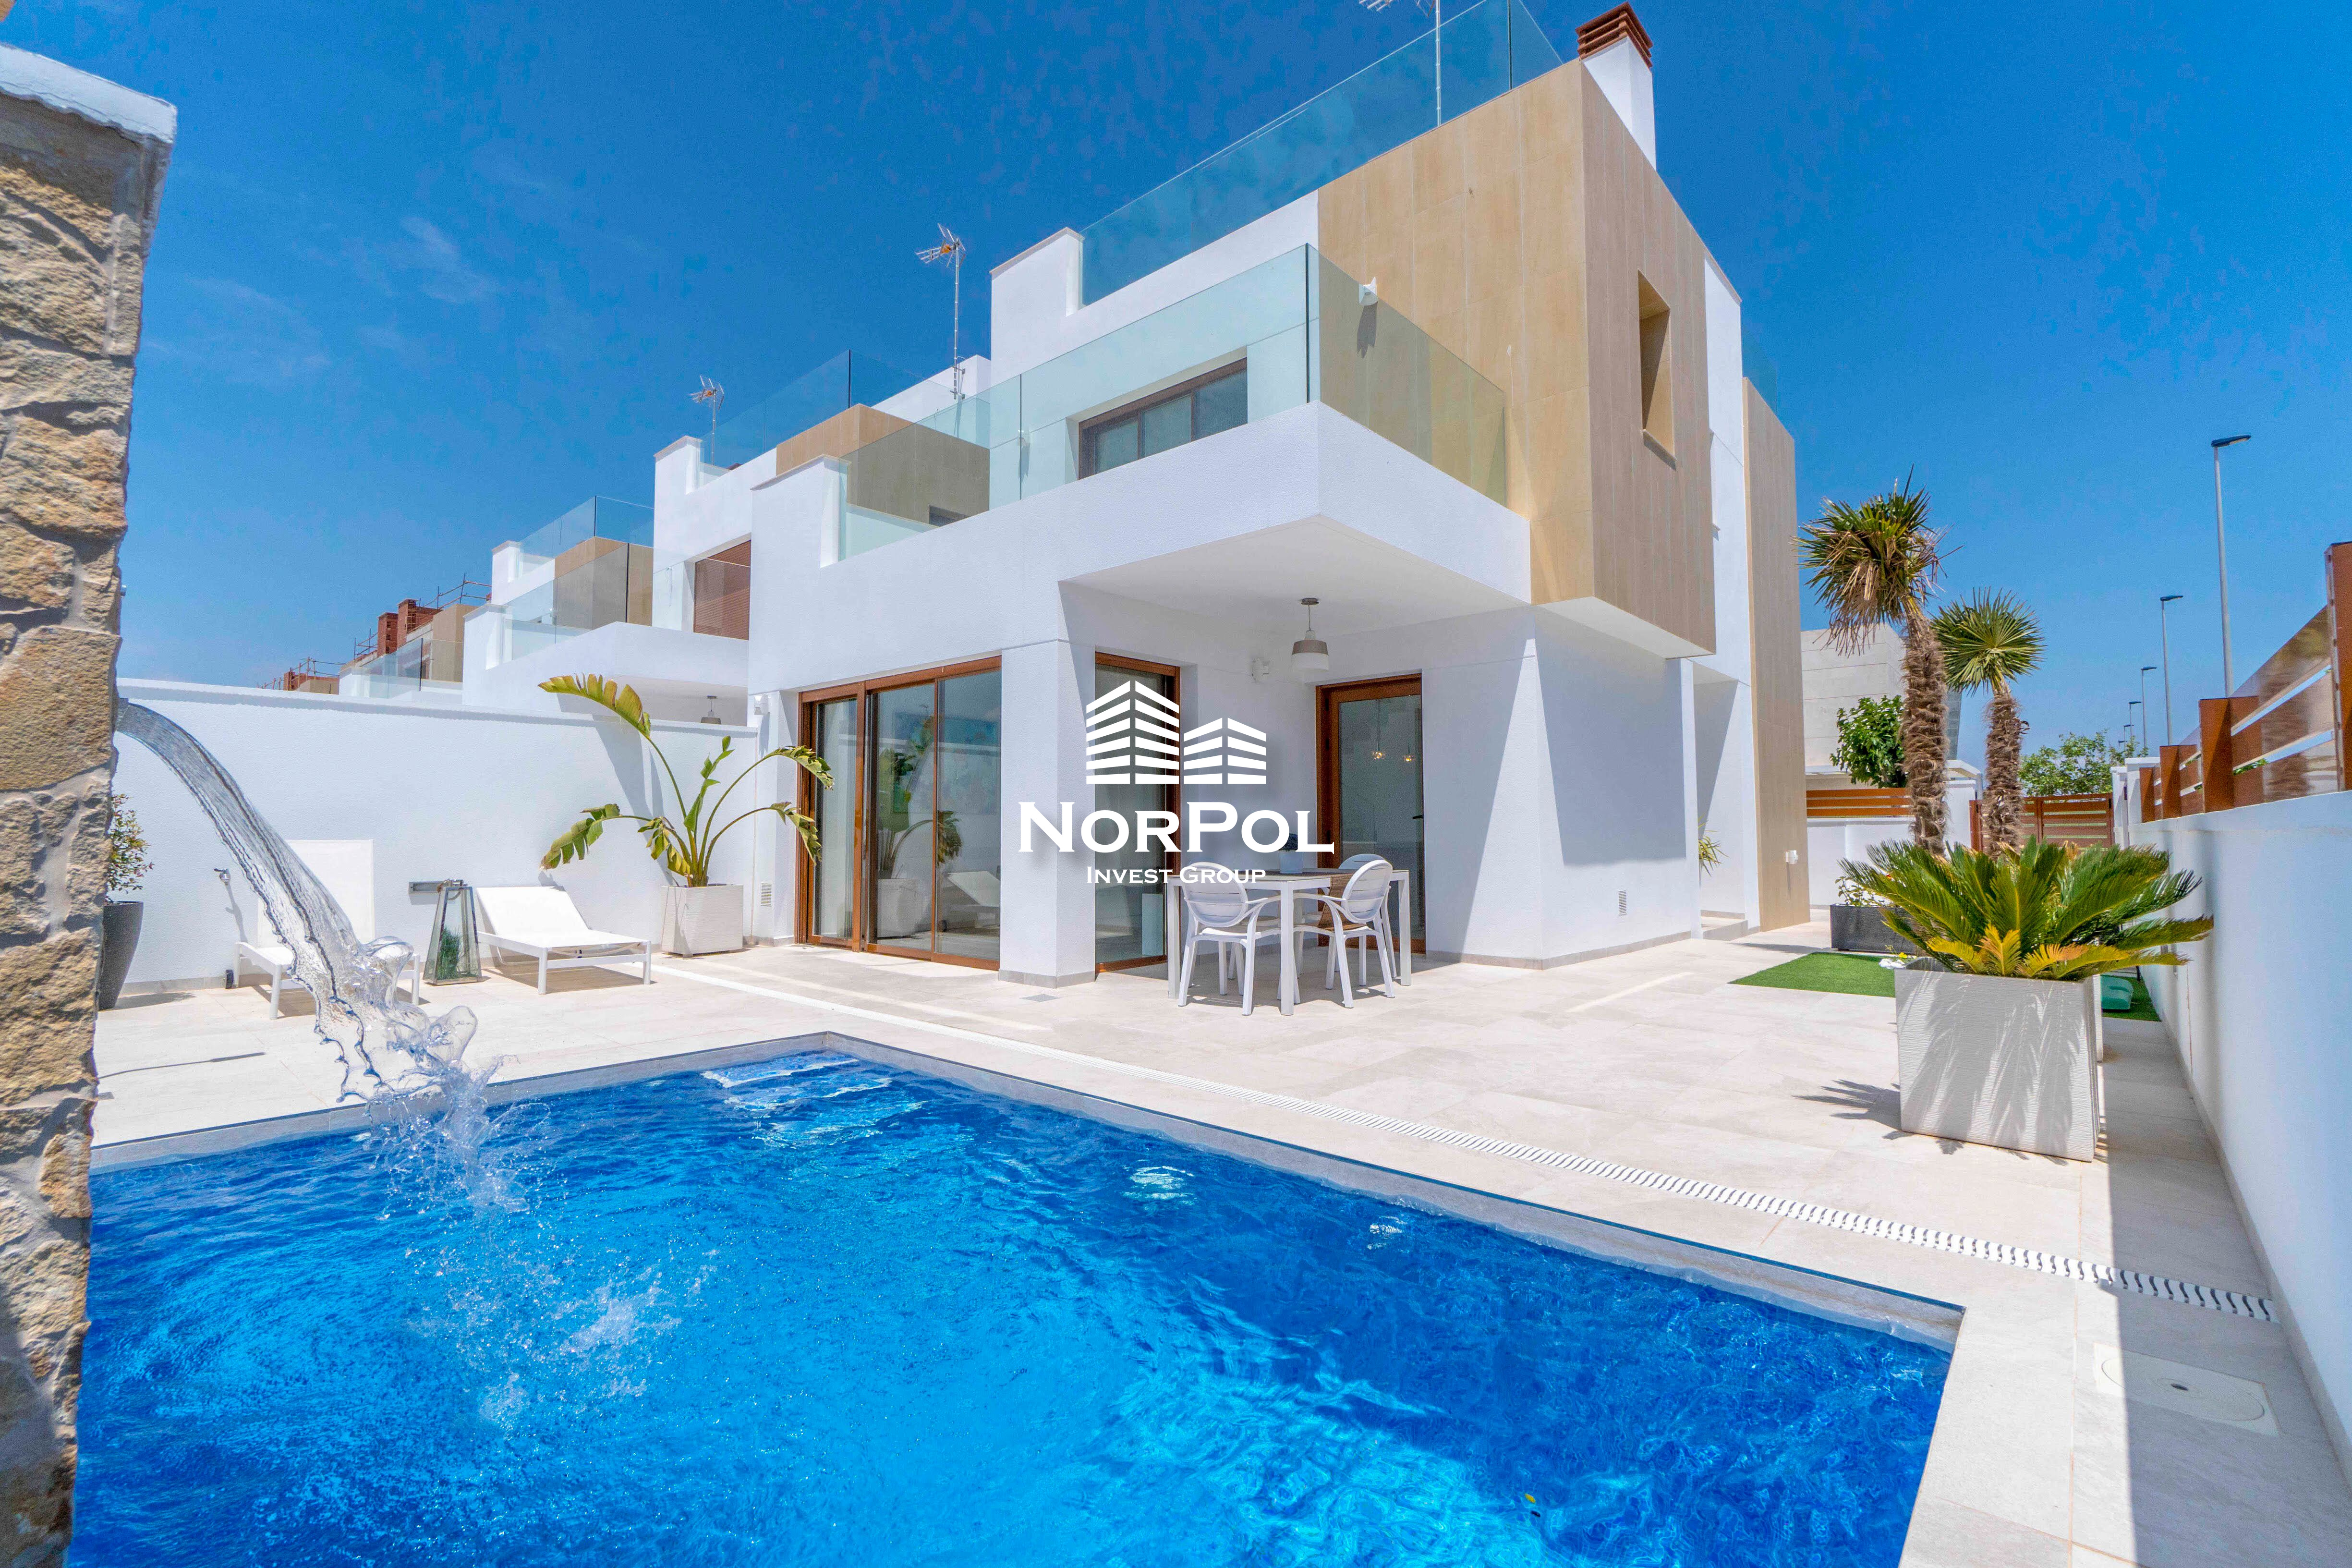 Villas with pool, 300 meters from the beach